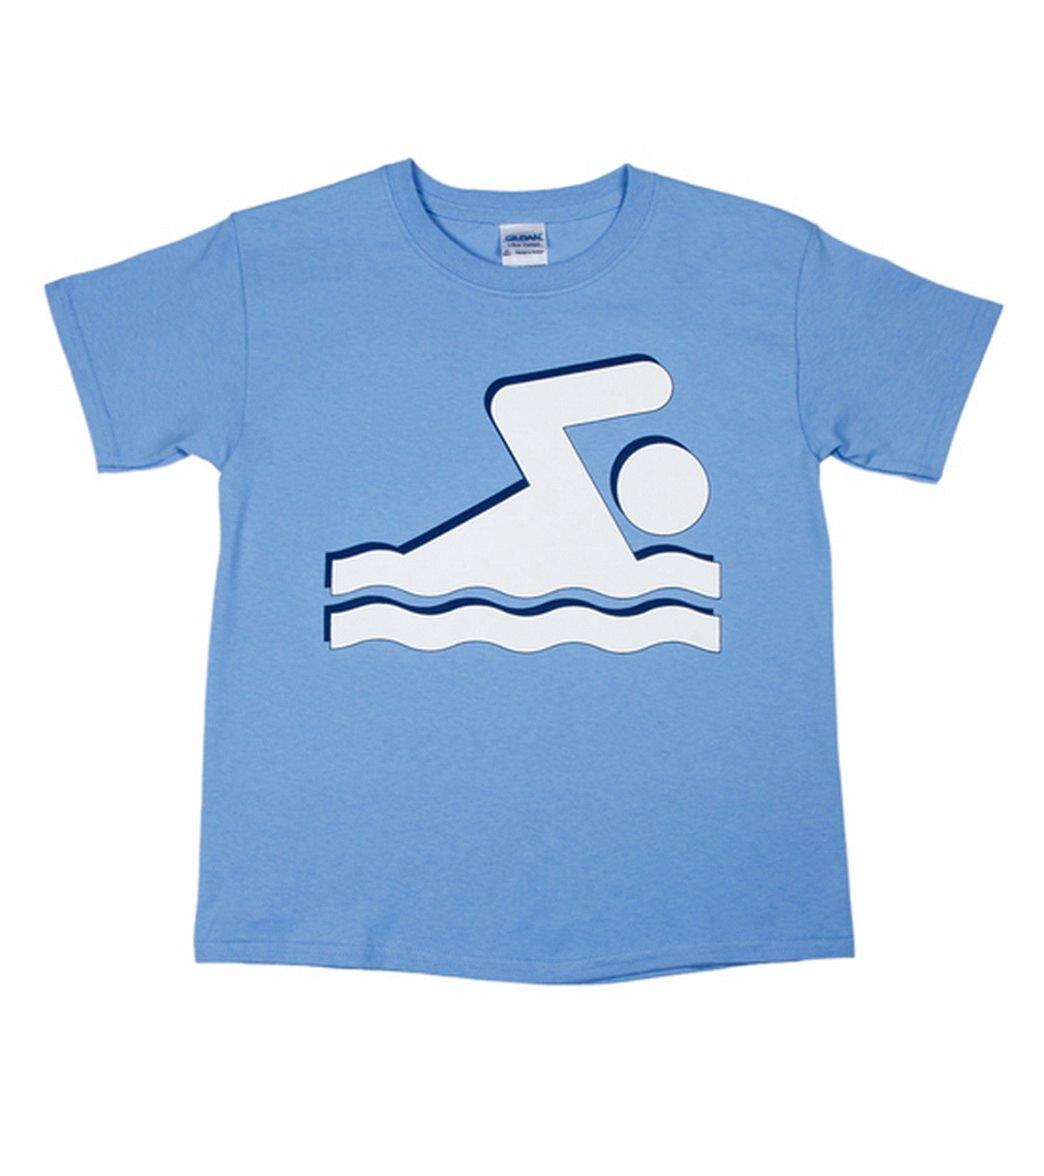 Ambro Manufacturing Men's Iconic Tee Shirt - Blue Youth Medium Cotton - Swimoutlet.com